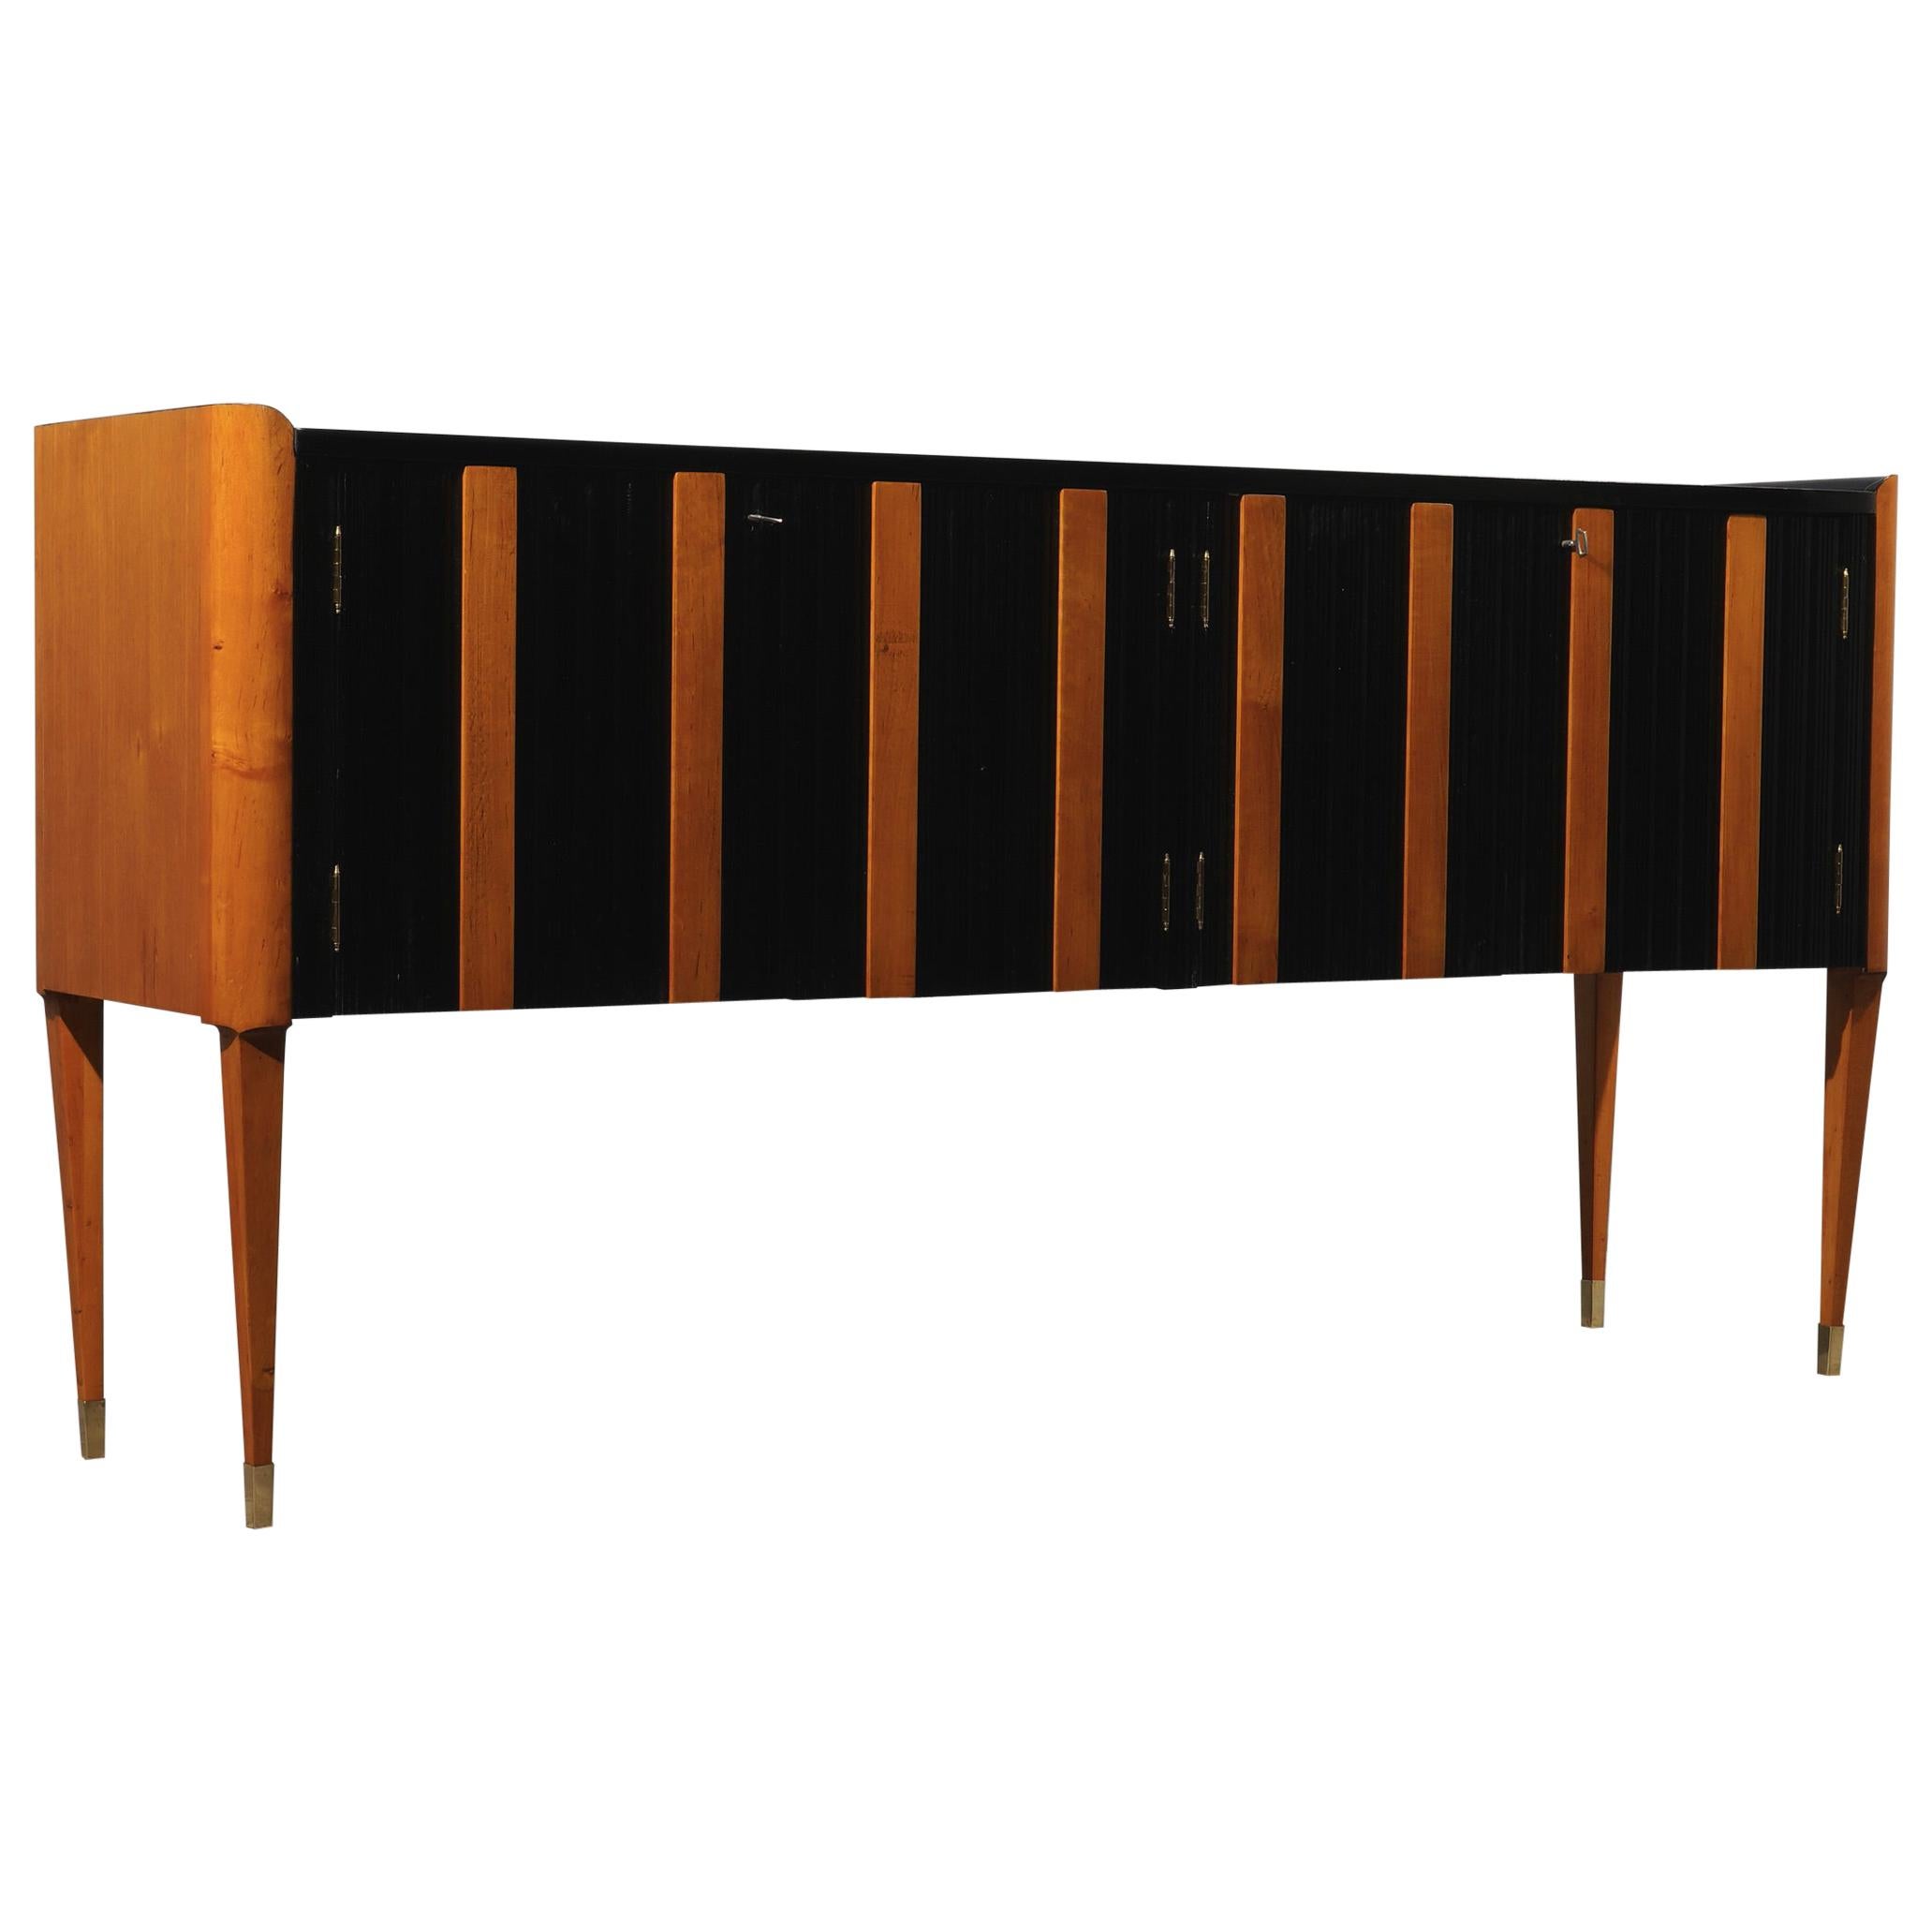 Art Deco Cherrywood and Black Lacquer Italian Sideboard, 1940